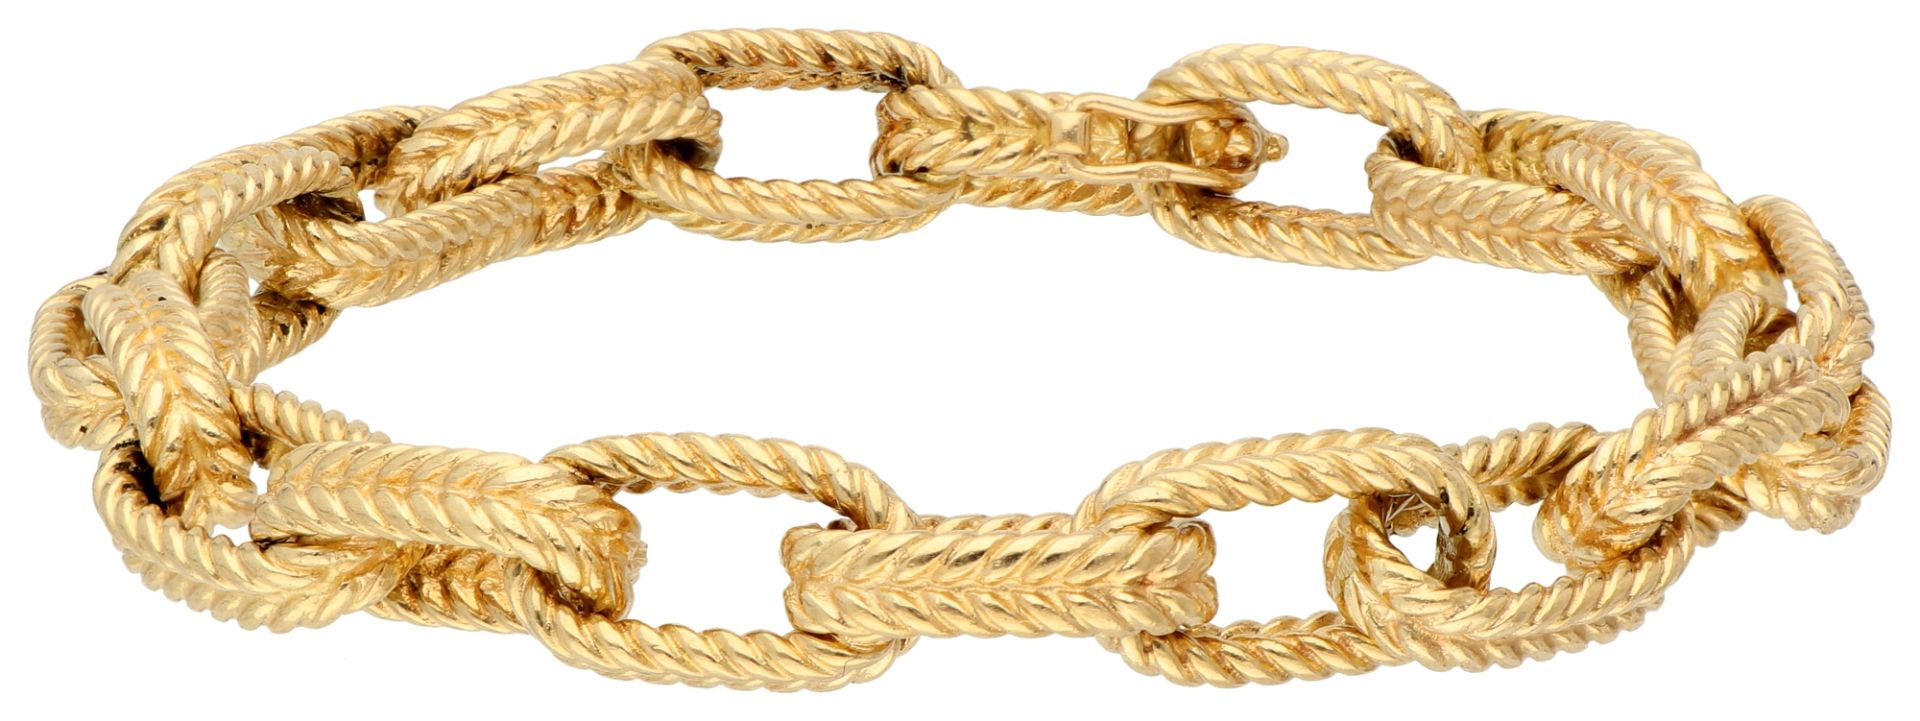 18K Yellow gold anchor link bracelet with braided details.